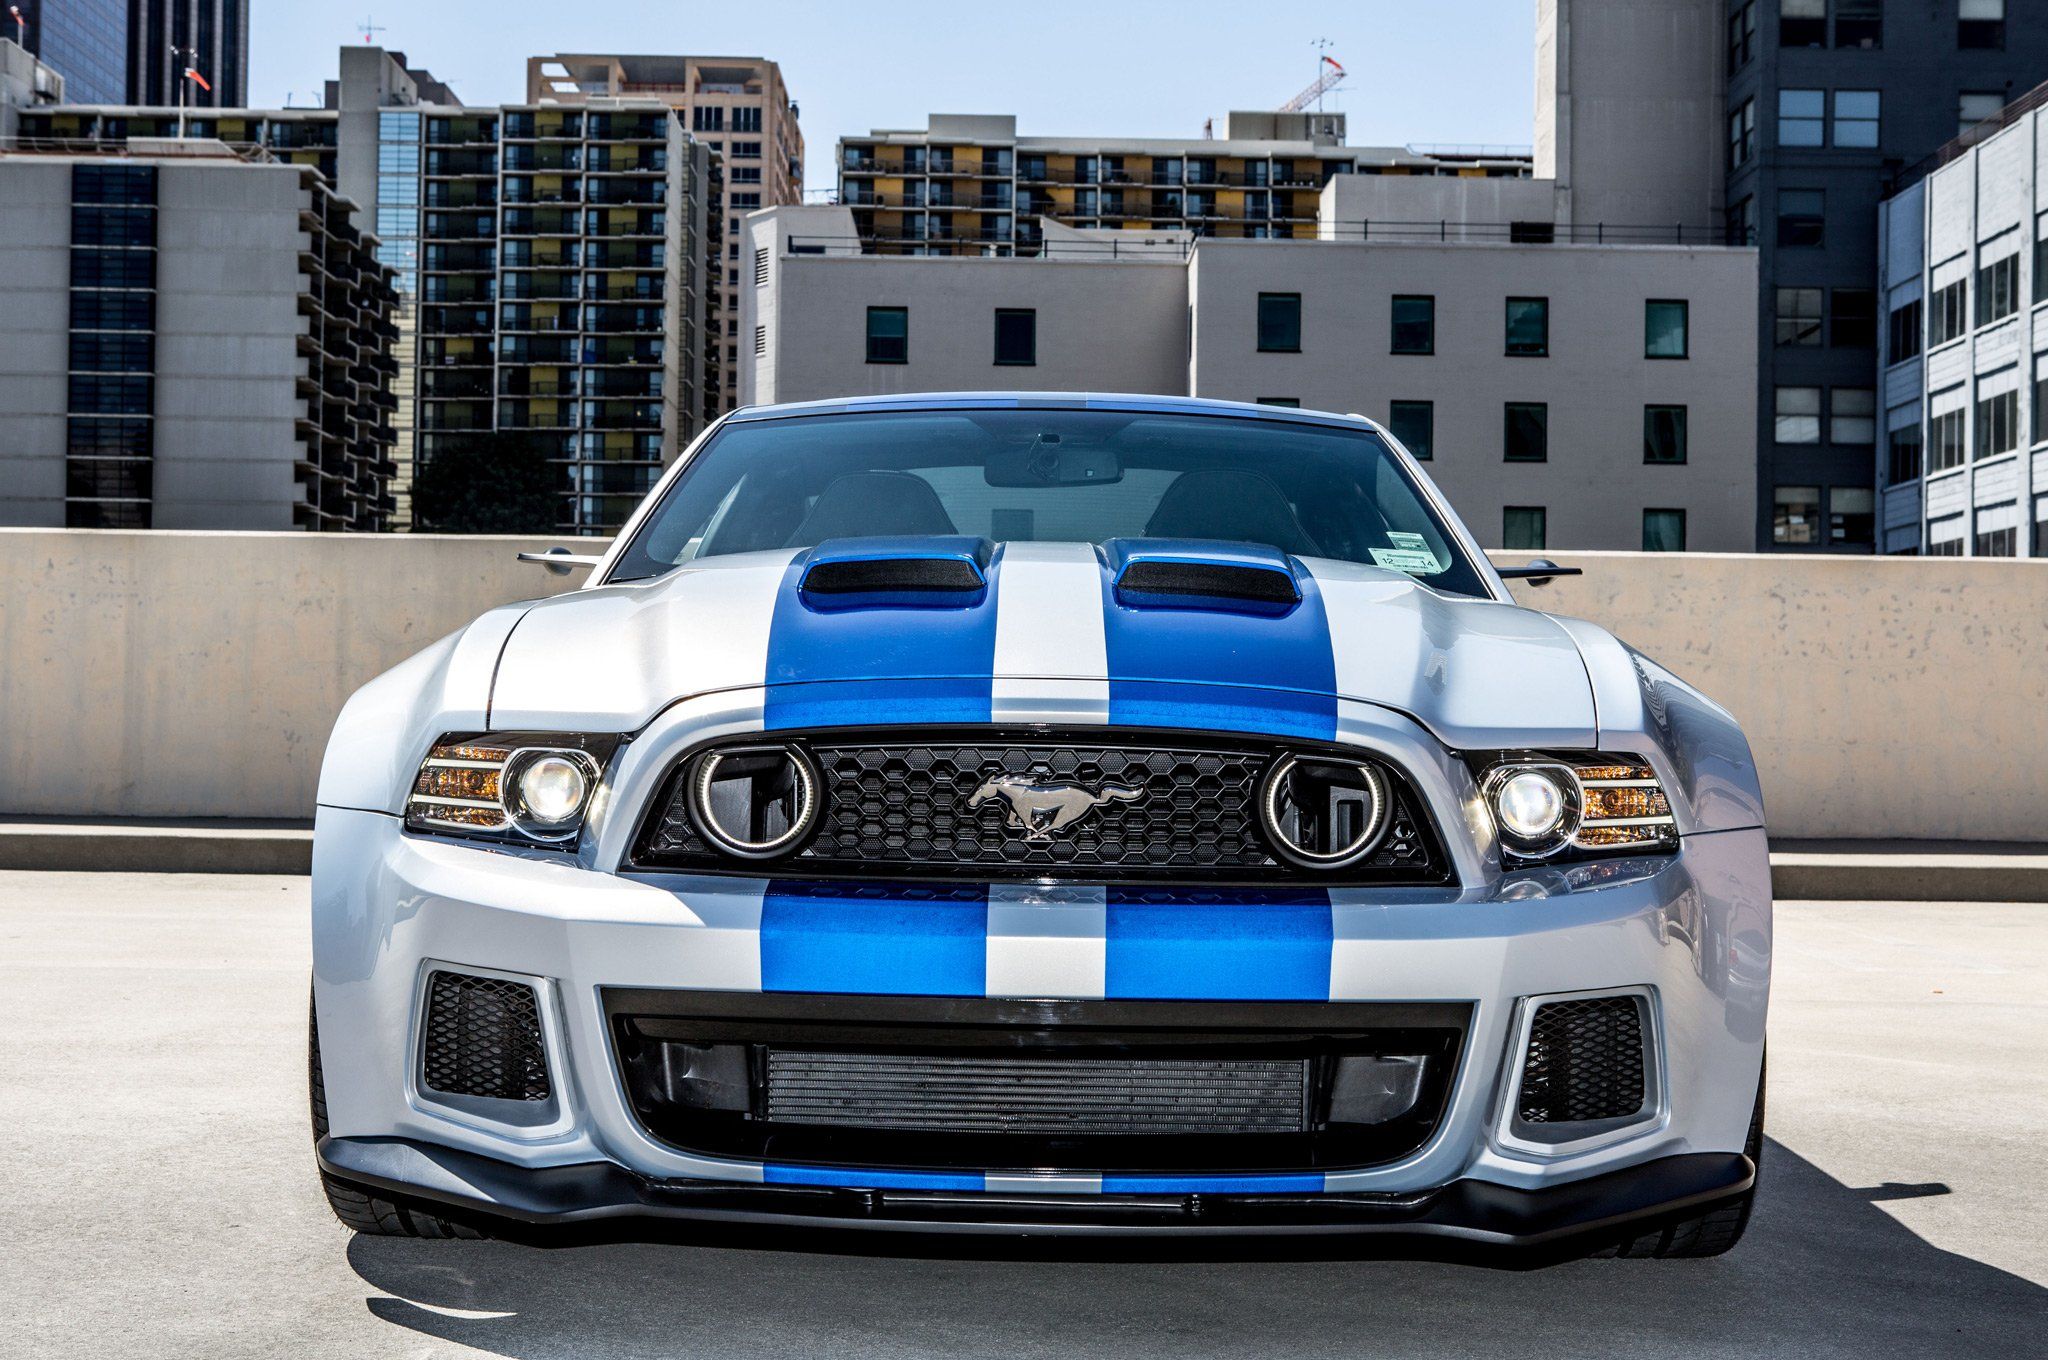 Need for Speed Mustang Wallpaper Free Need for Speed Mustang Background